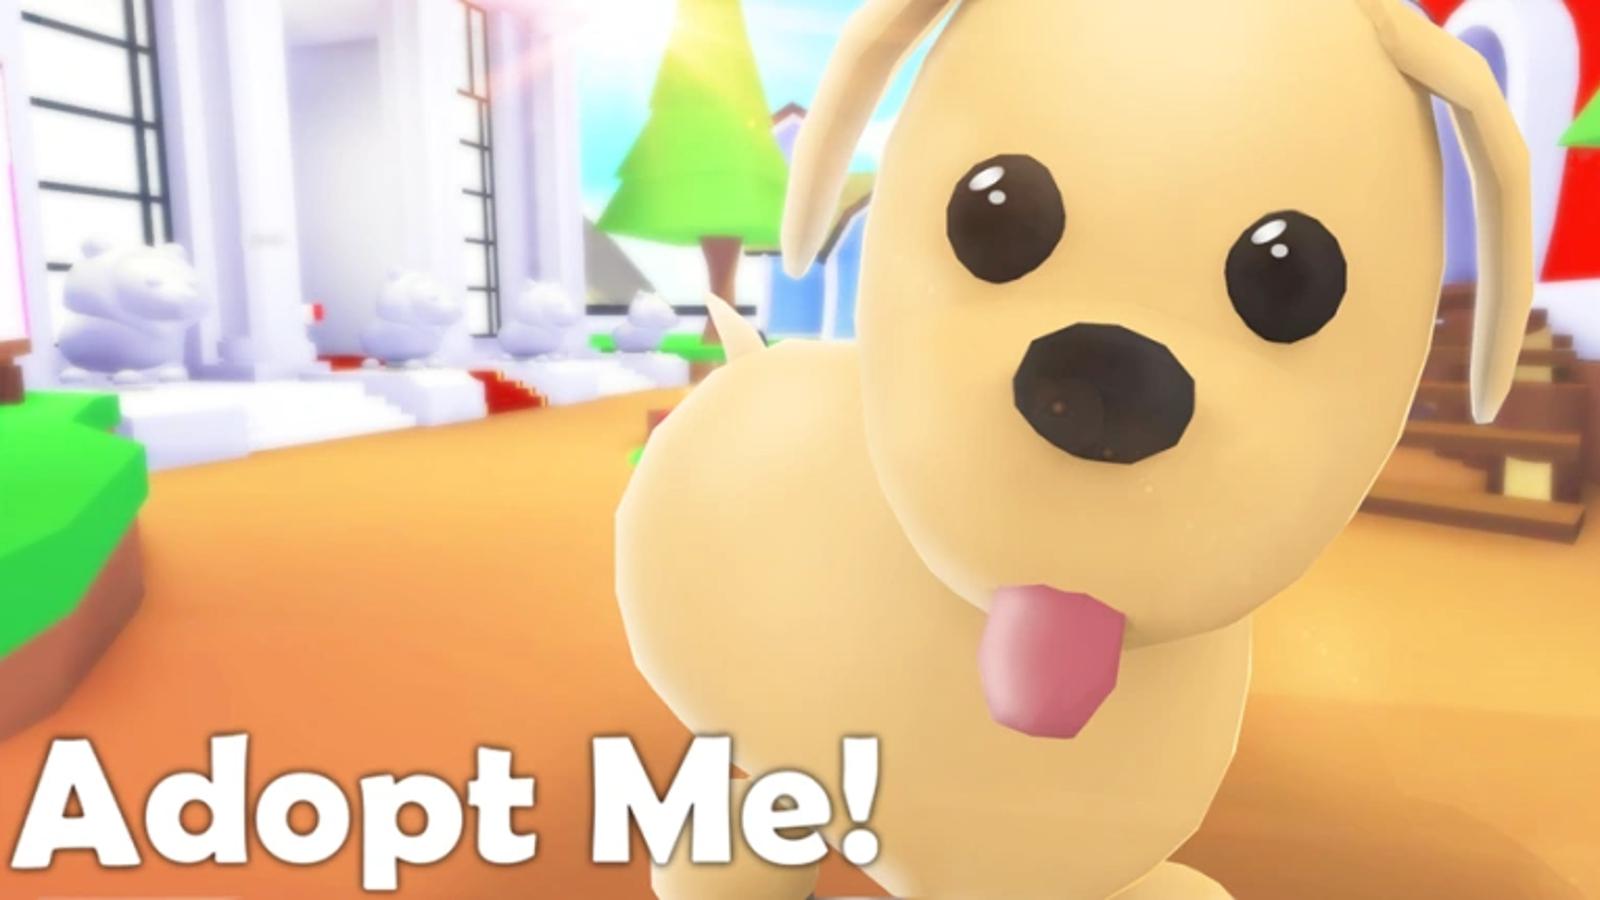 Roblox Collect All Pets codes for free gold boost (December 2023)